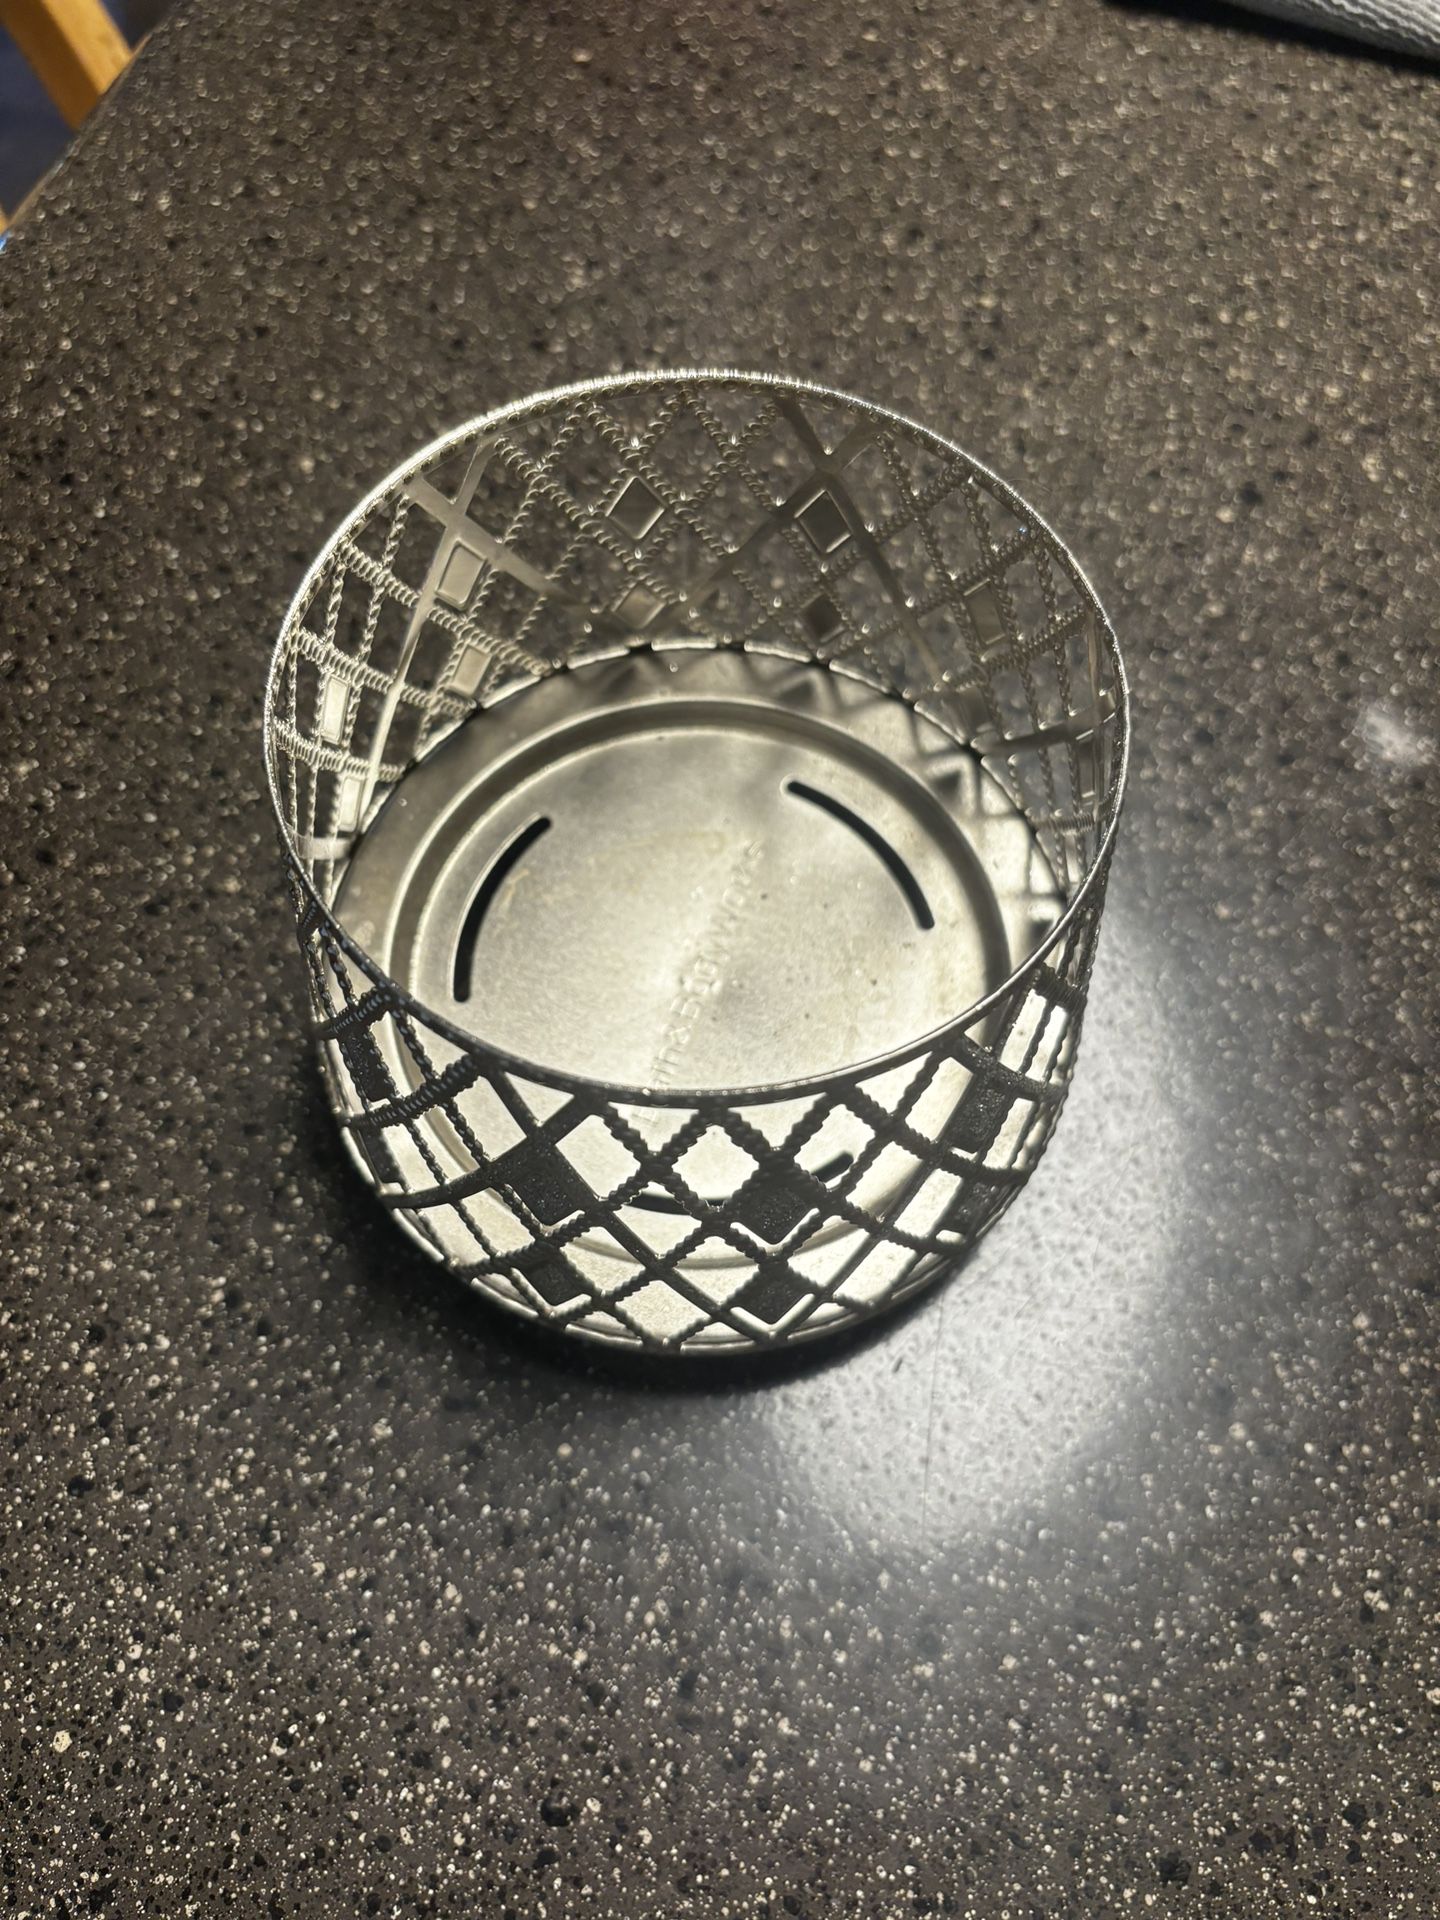 candle holder 